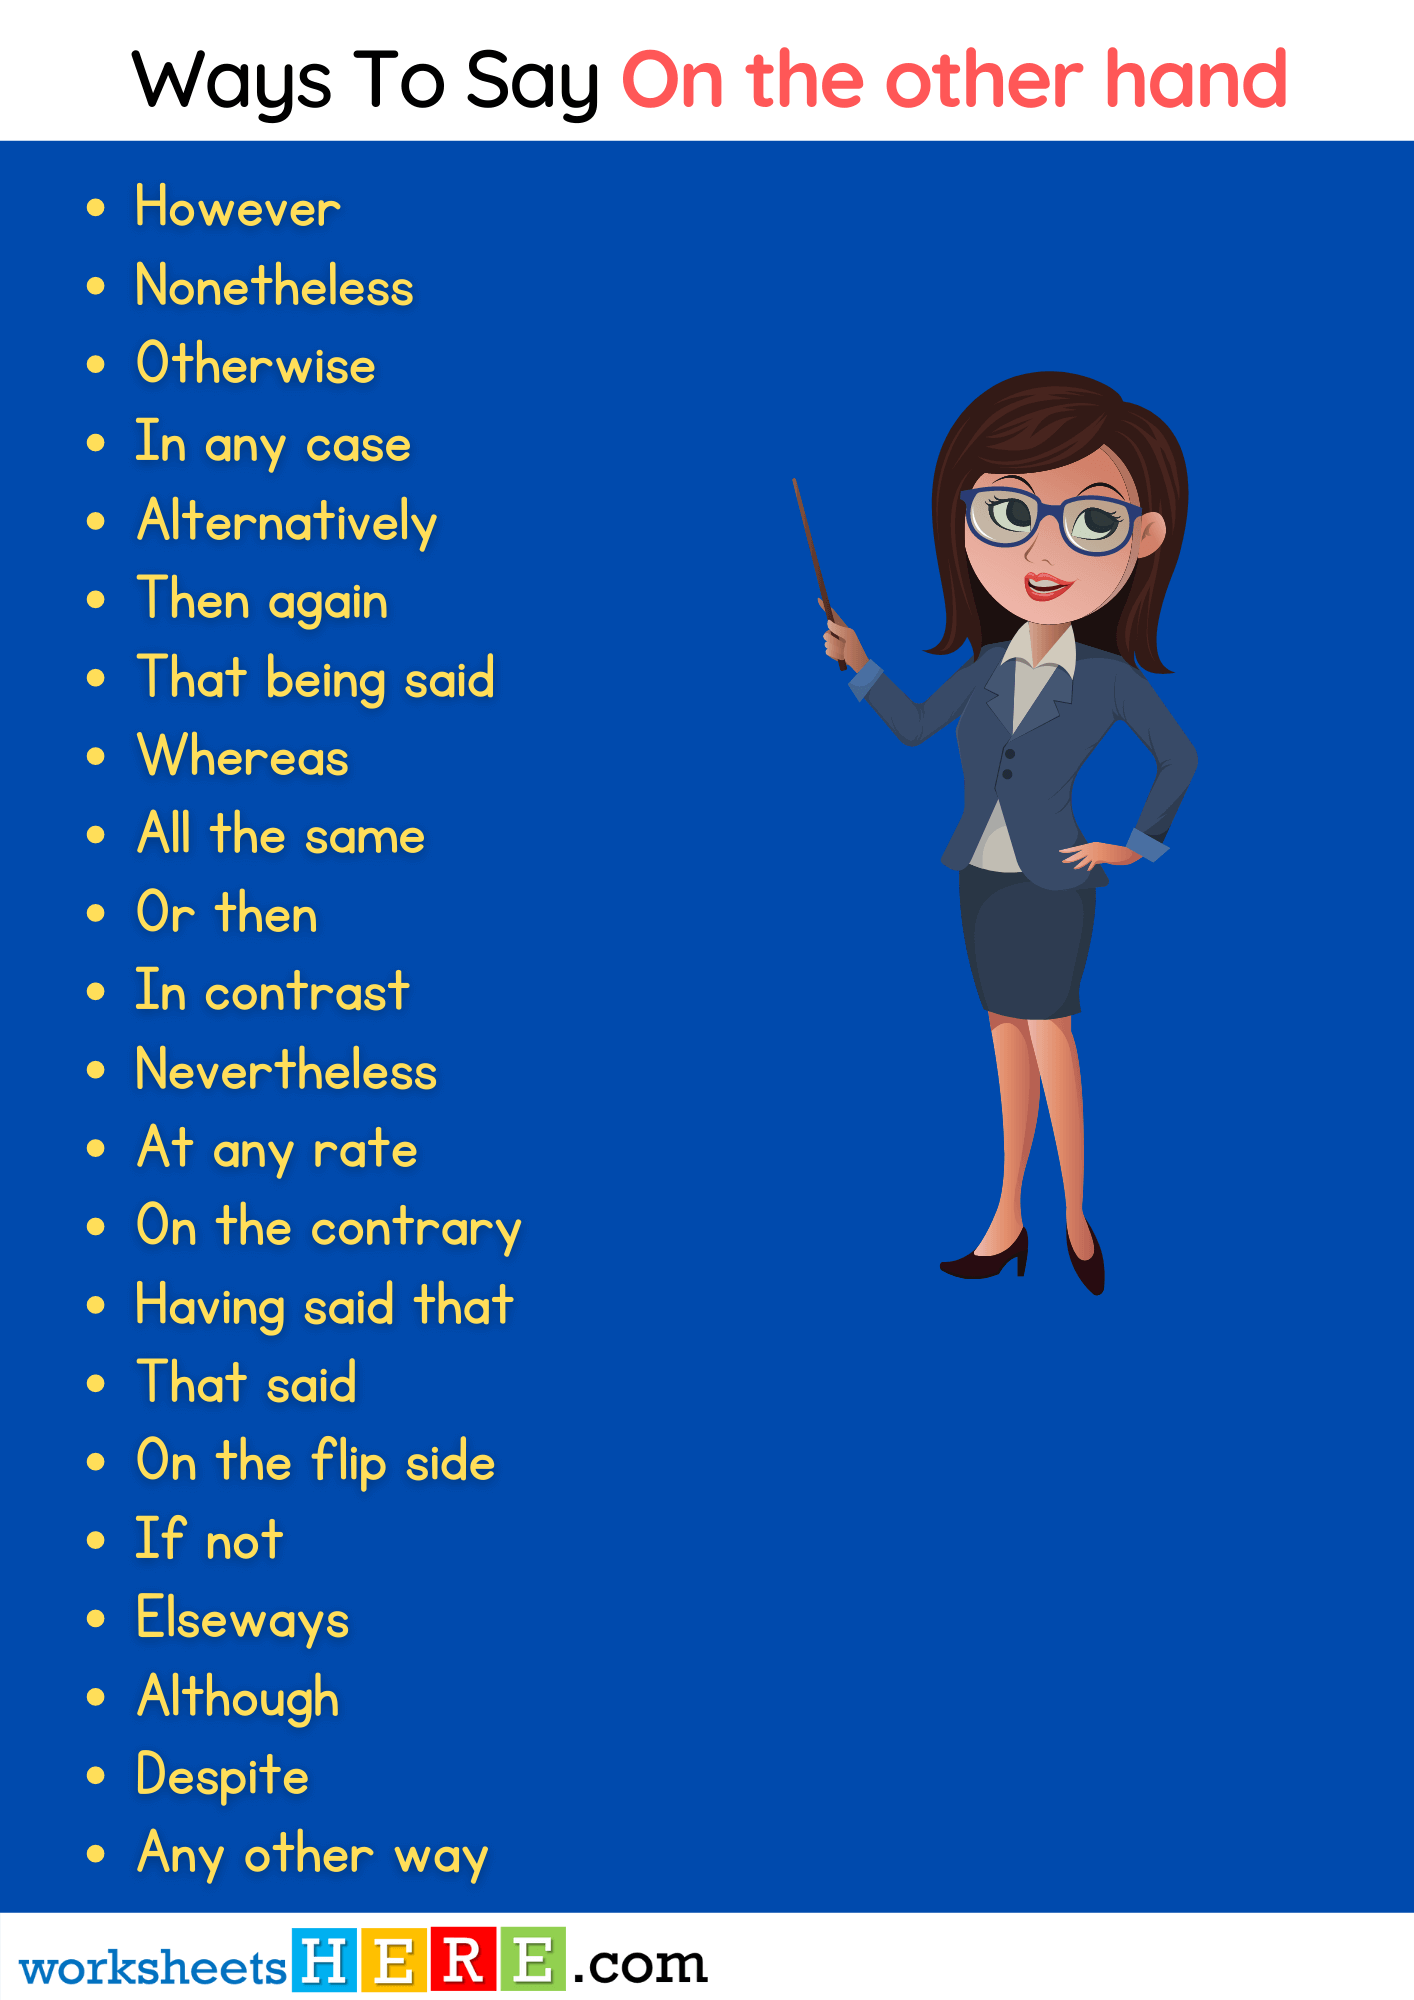 Ways To Say On the other hand PDF Worksheet For Students